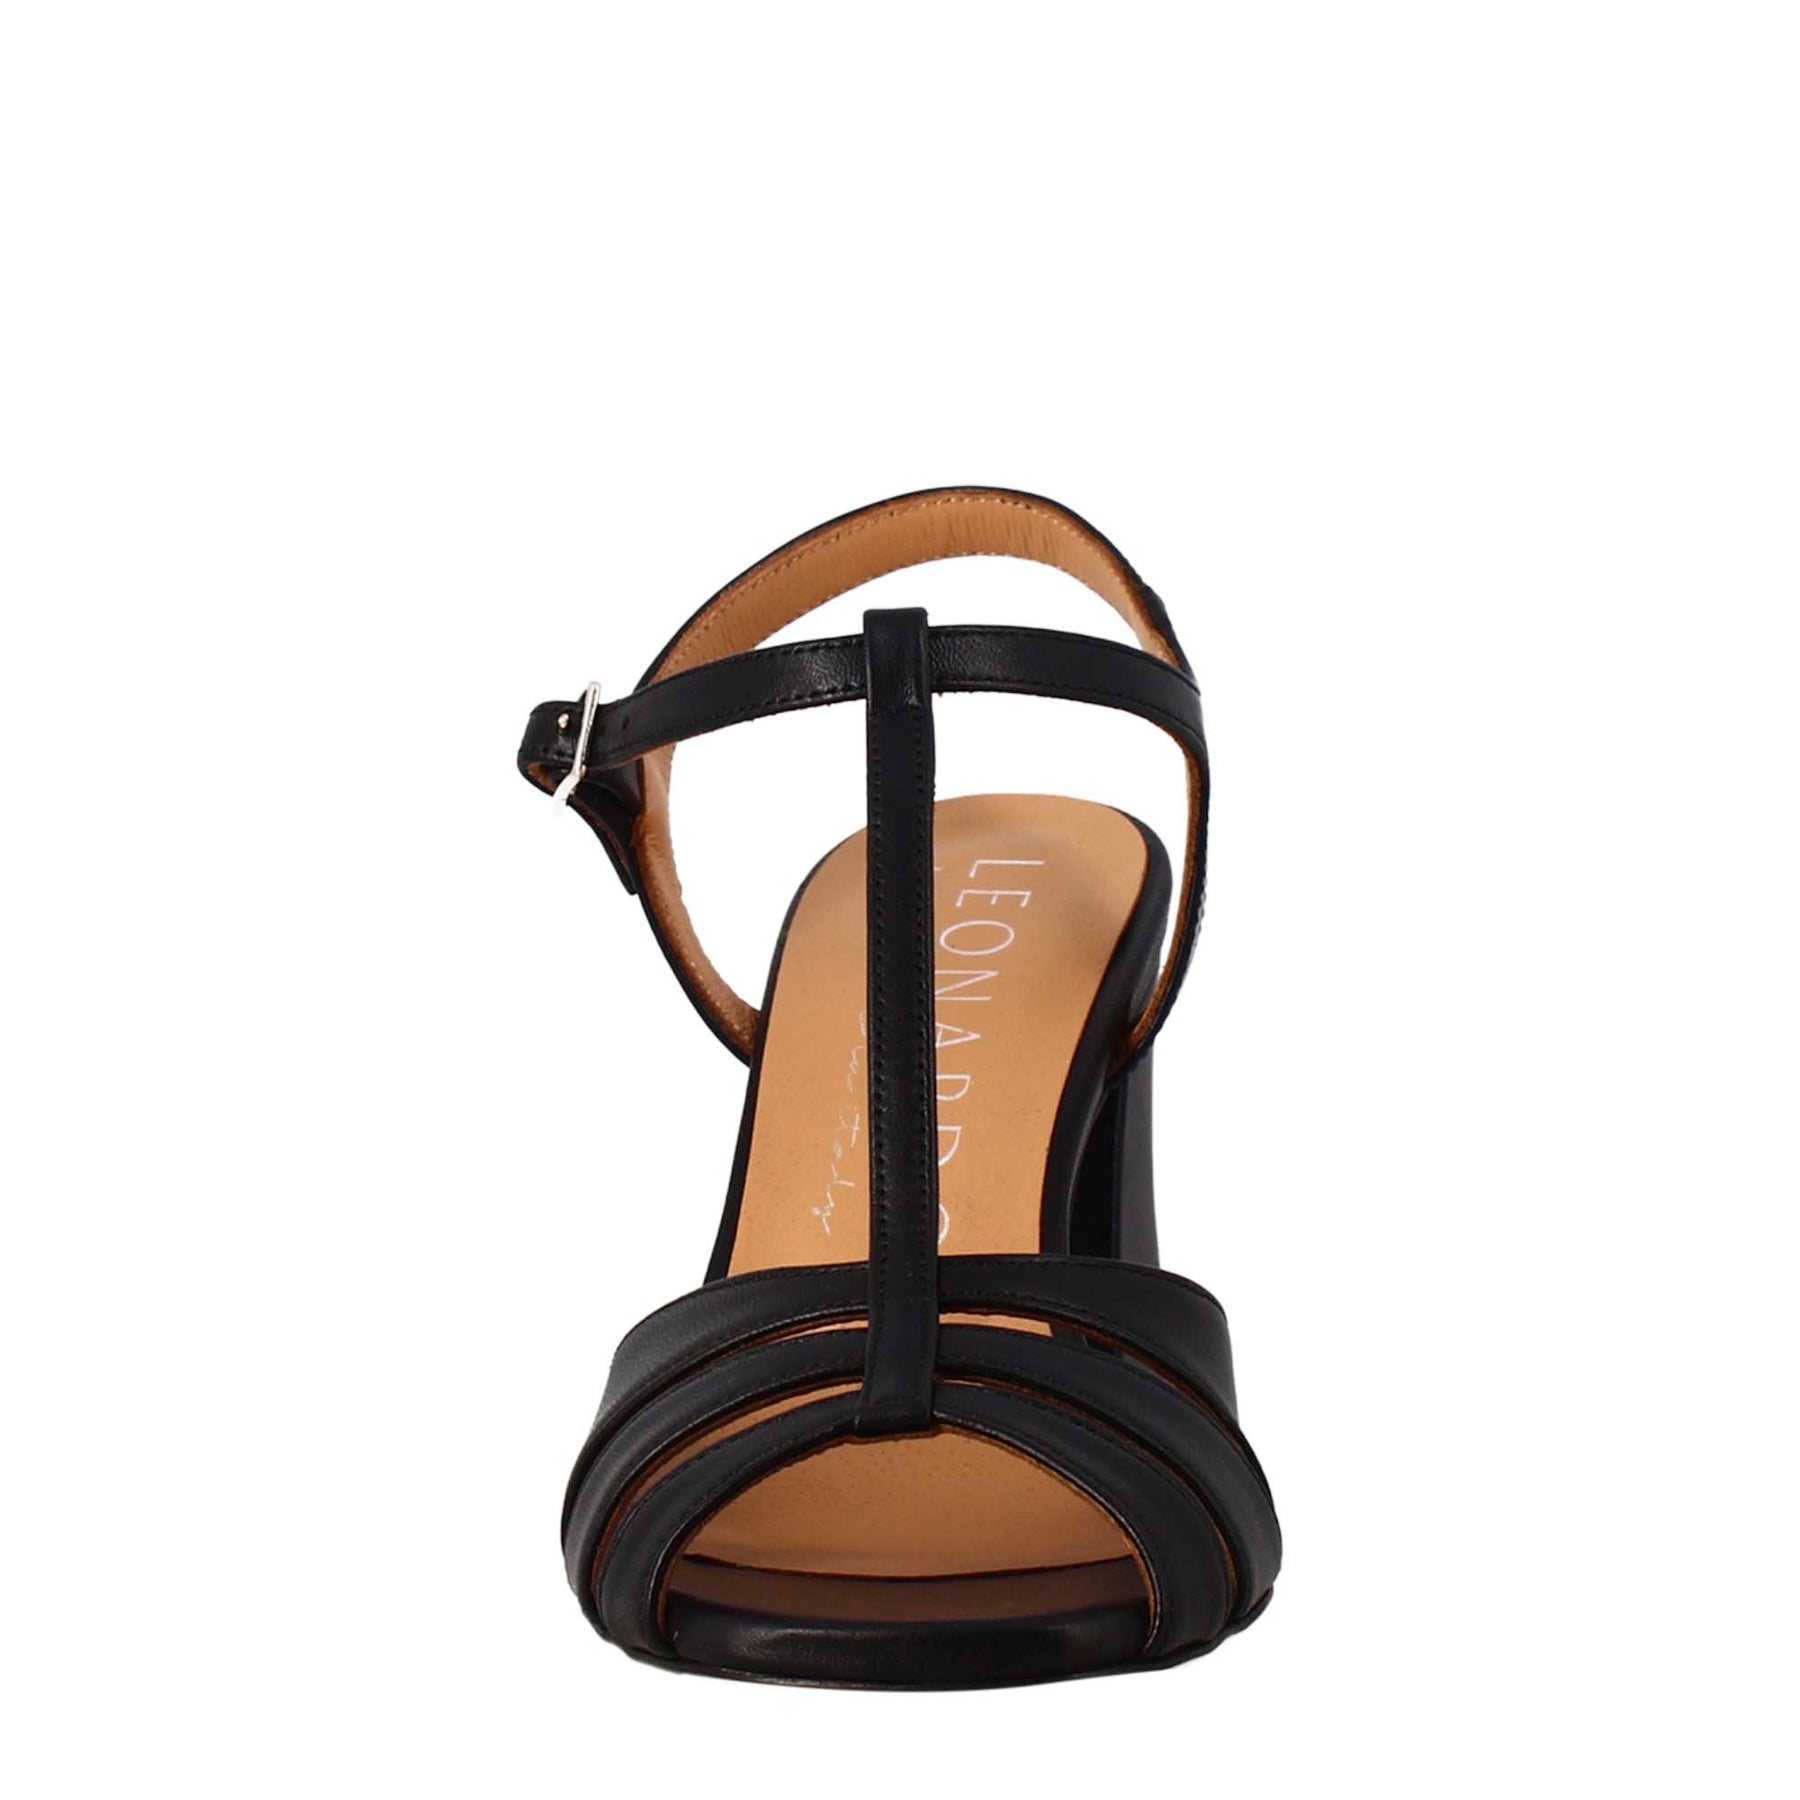 Women's cage sandal in black leather